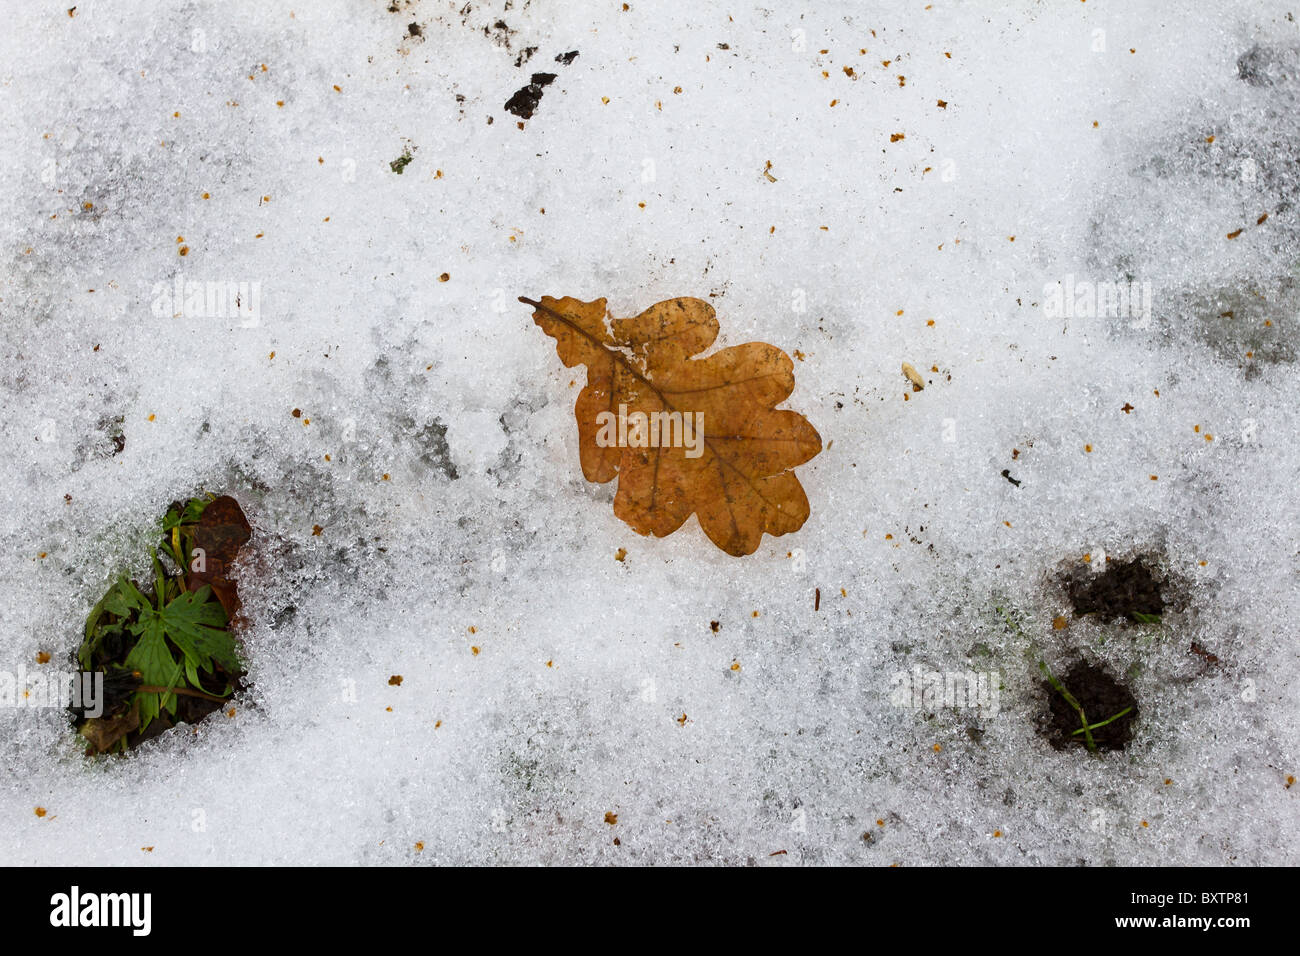 Single rotting leaf on snow and ice covered ground. Stock Photo